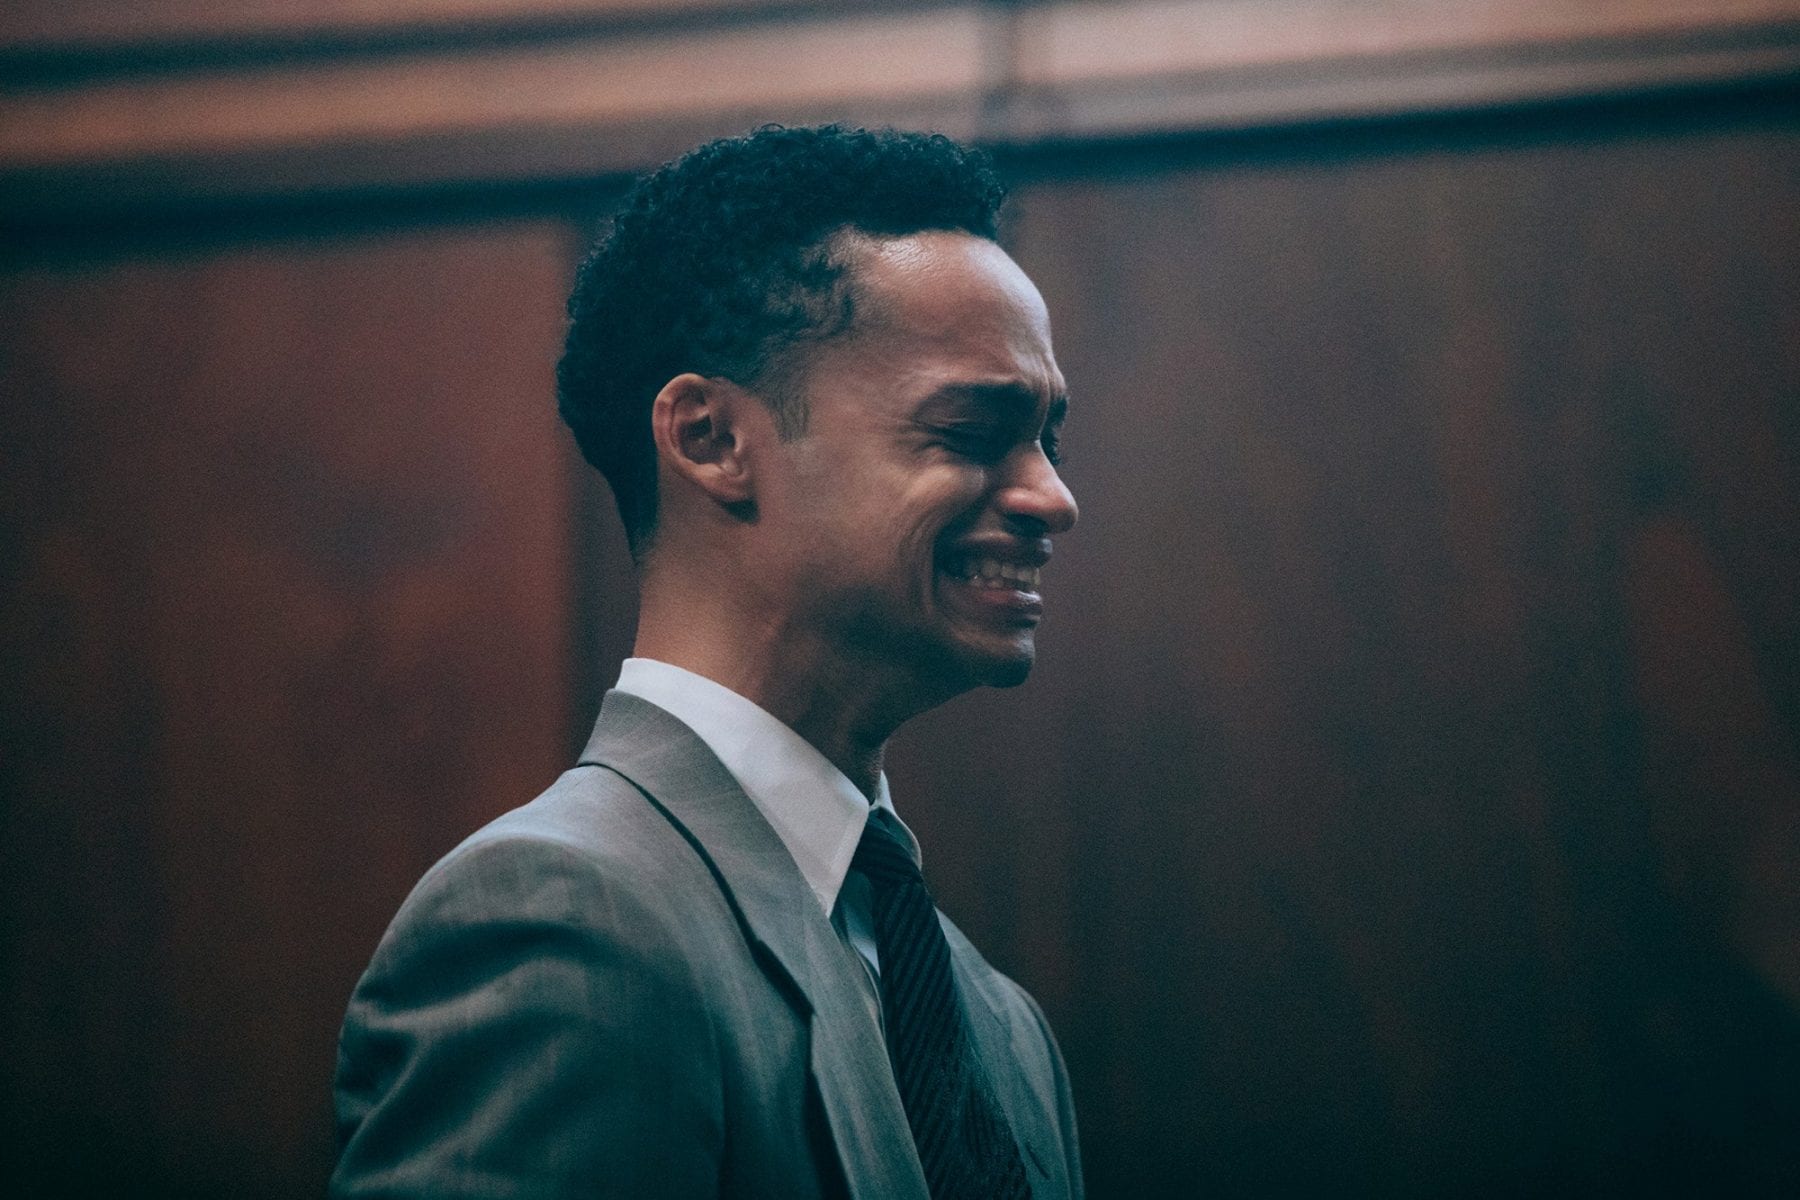 The young Raymond Santana (Marquis Rodriguez) cries at trial in Netflix's When They See Us